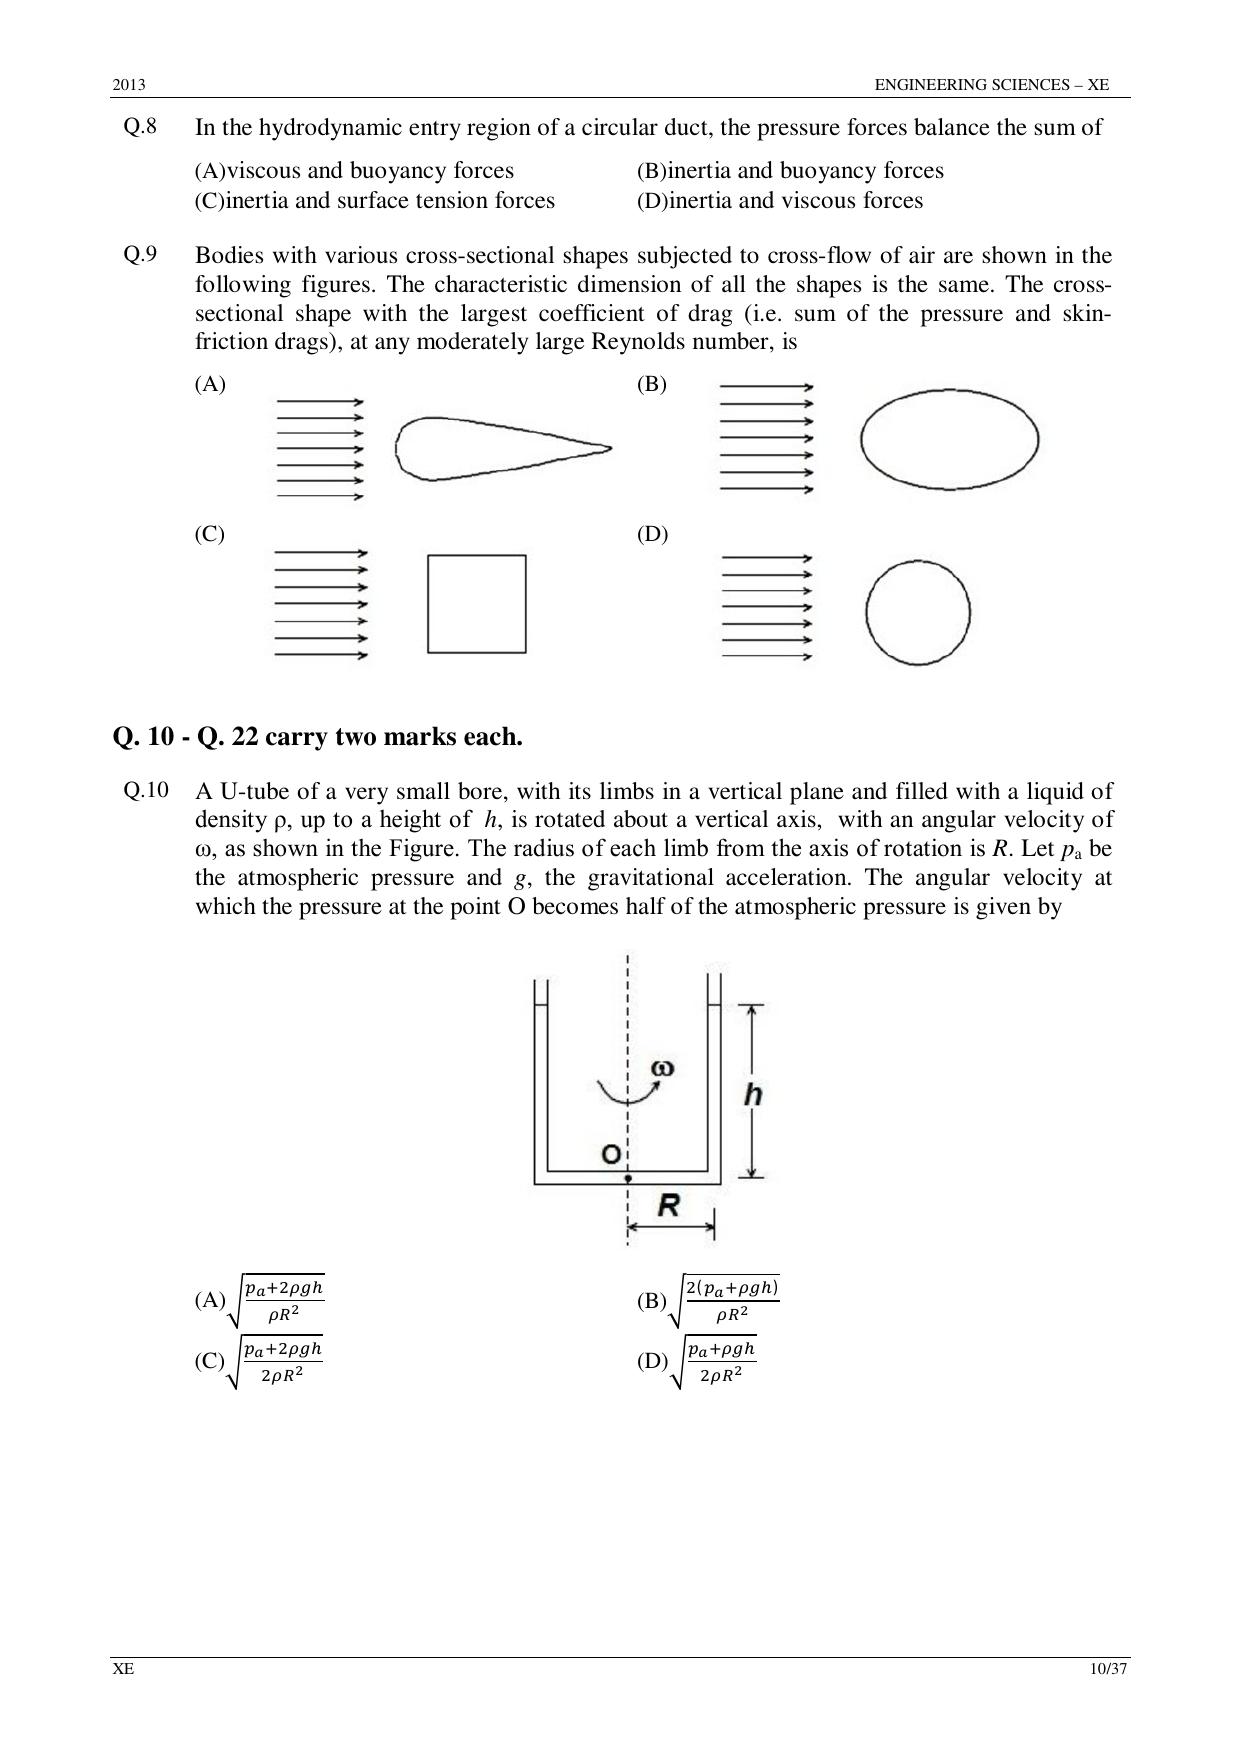 GATE 2013 Engineering Sciences (XE) Question Paper with Answer Key - Page 10